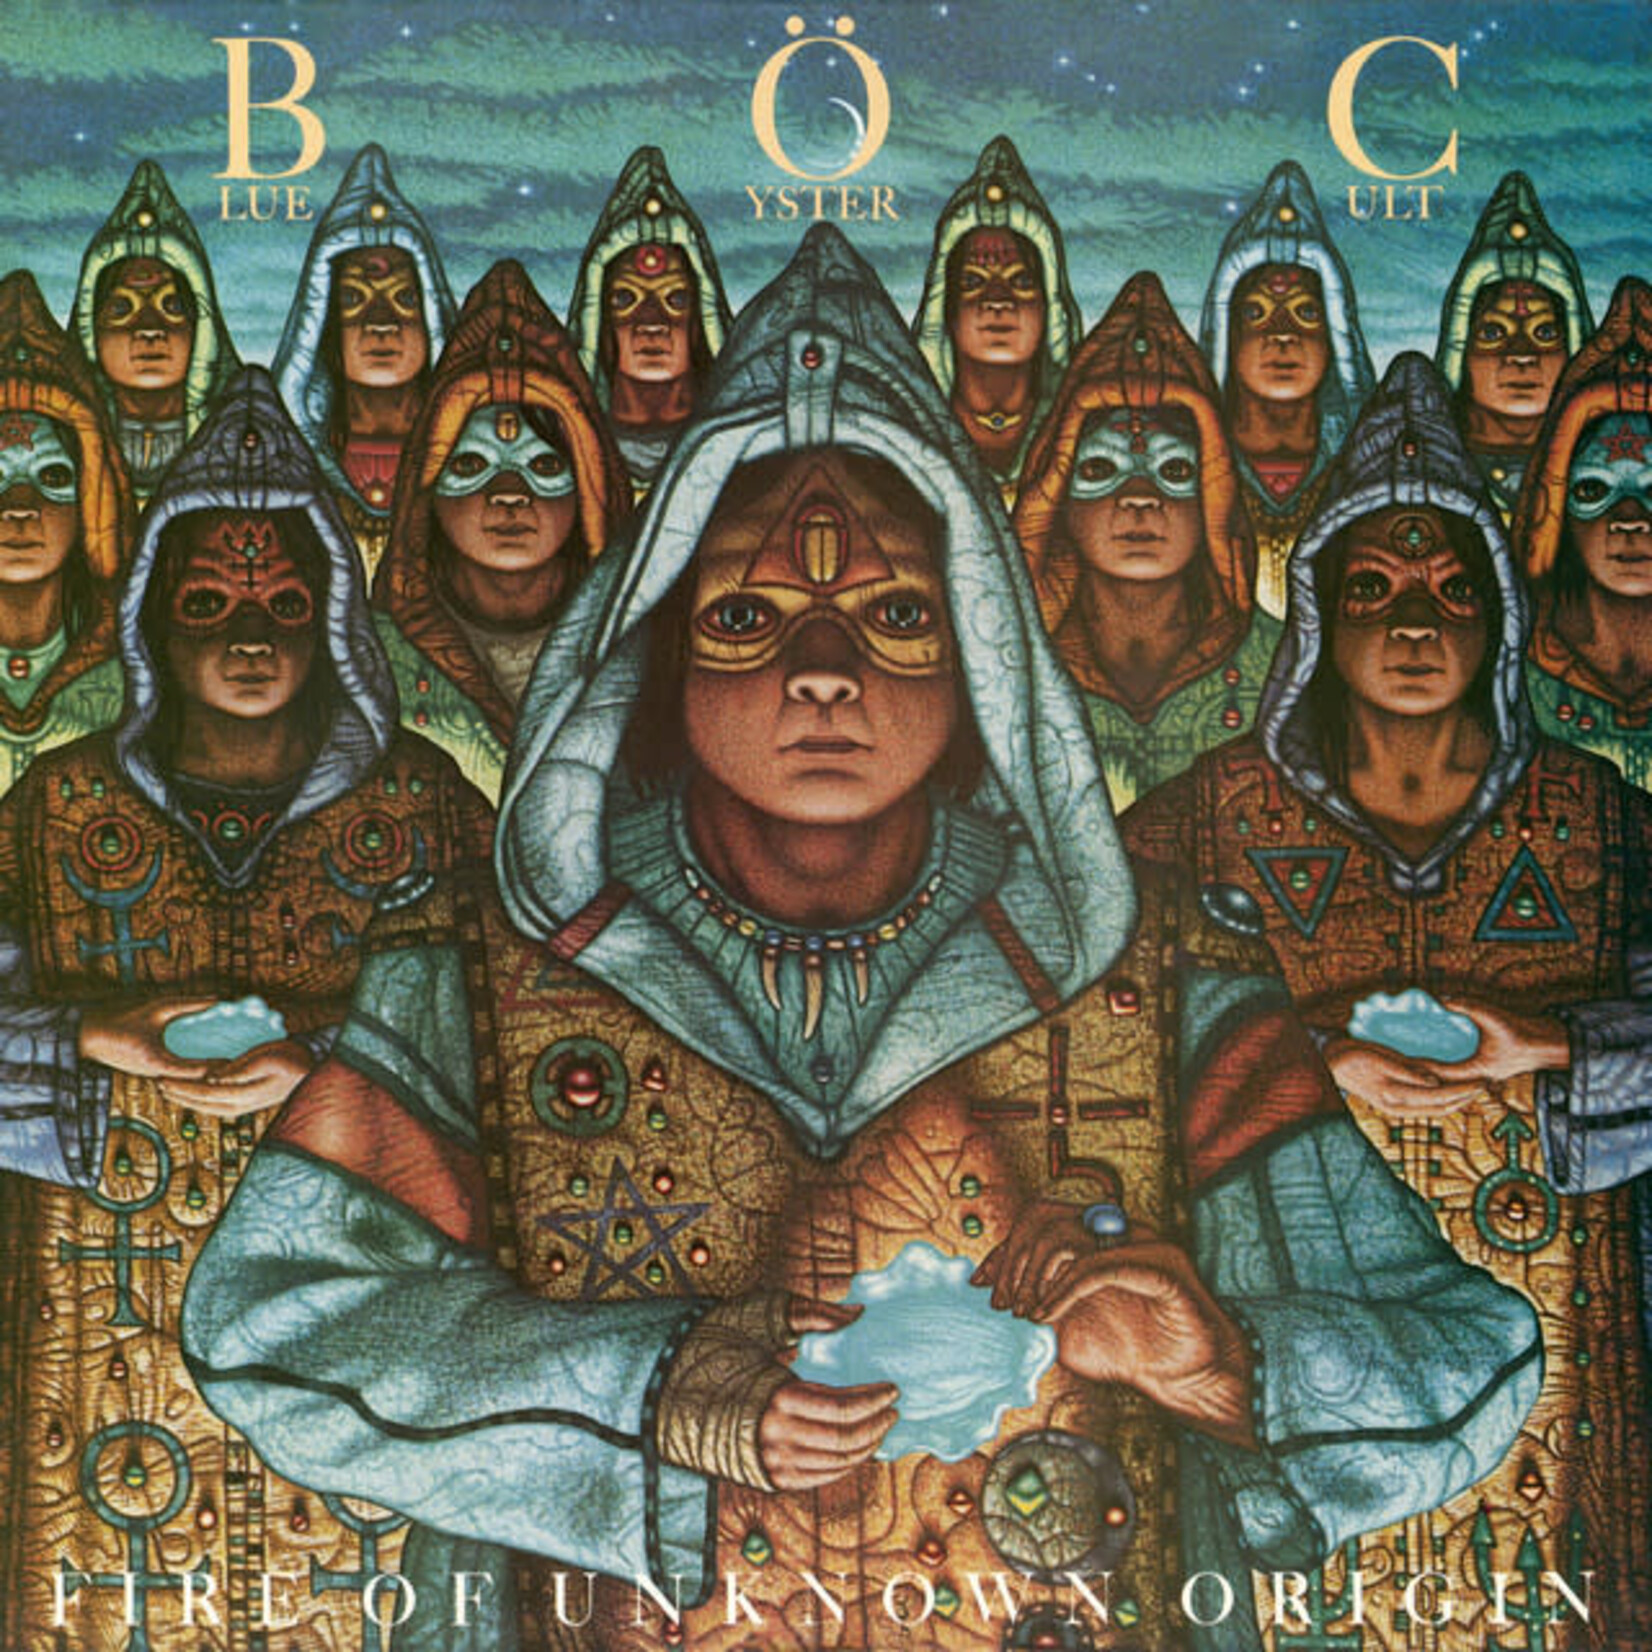 Blue Oyster Cult - Fire Of Unknown Origin [CD]